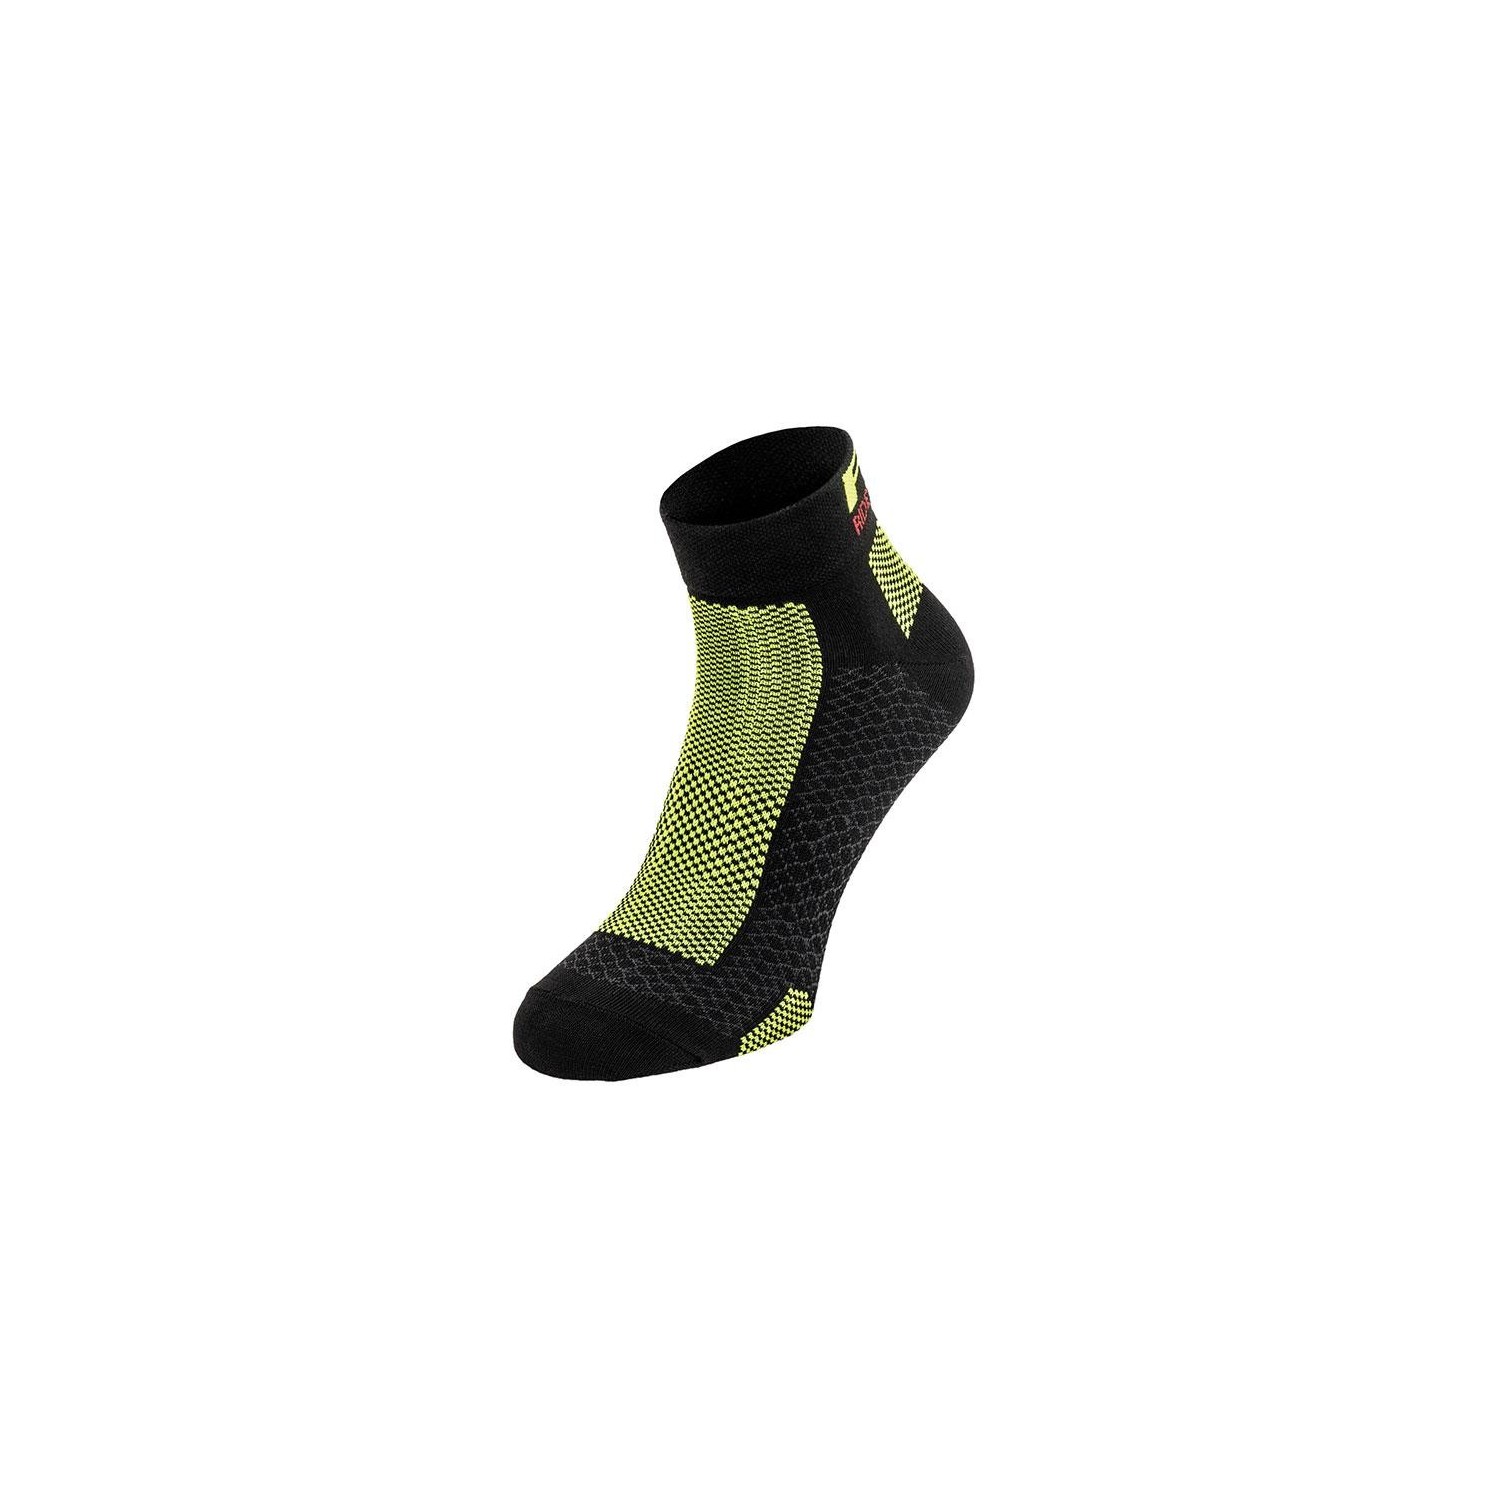 CALCETINES CICLISMO EASY R2 VERDE/NEGRO T.M